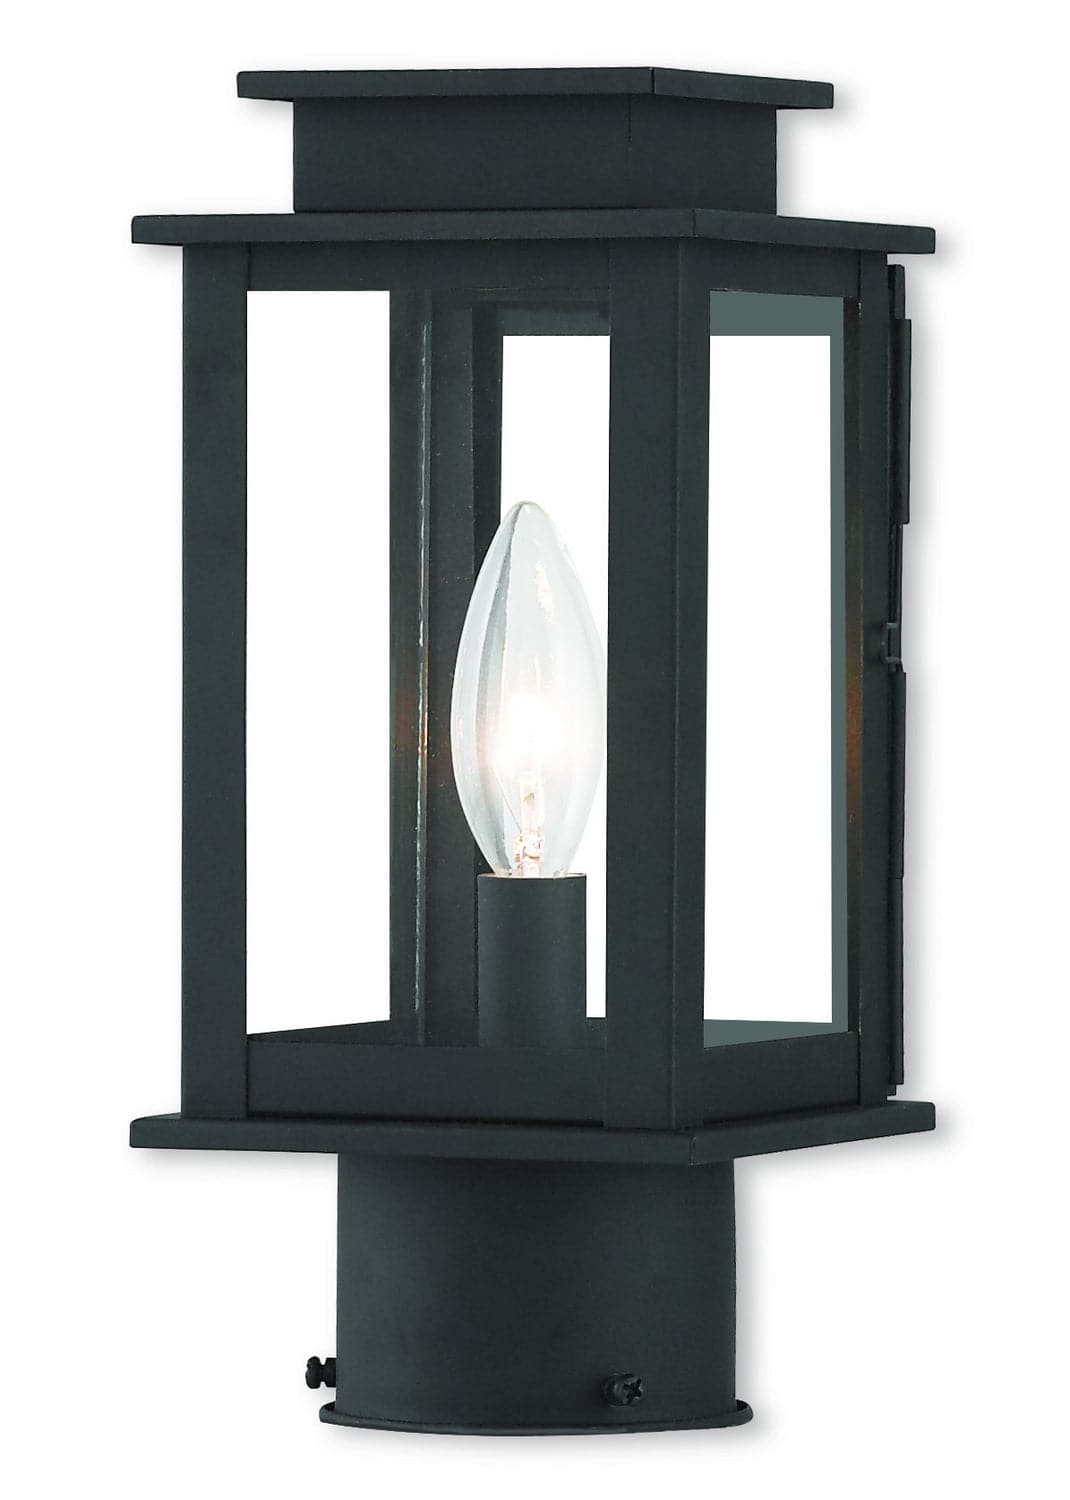 Livex Lighting - 20201-04 - One Light Outdoor Post-Top Lanterm - Princeton - Black w/ Polished Chrome Stainless Steel